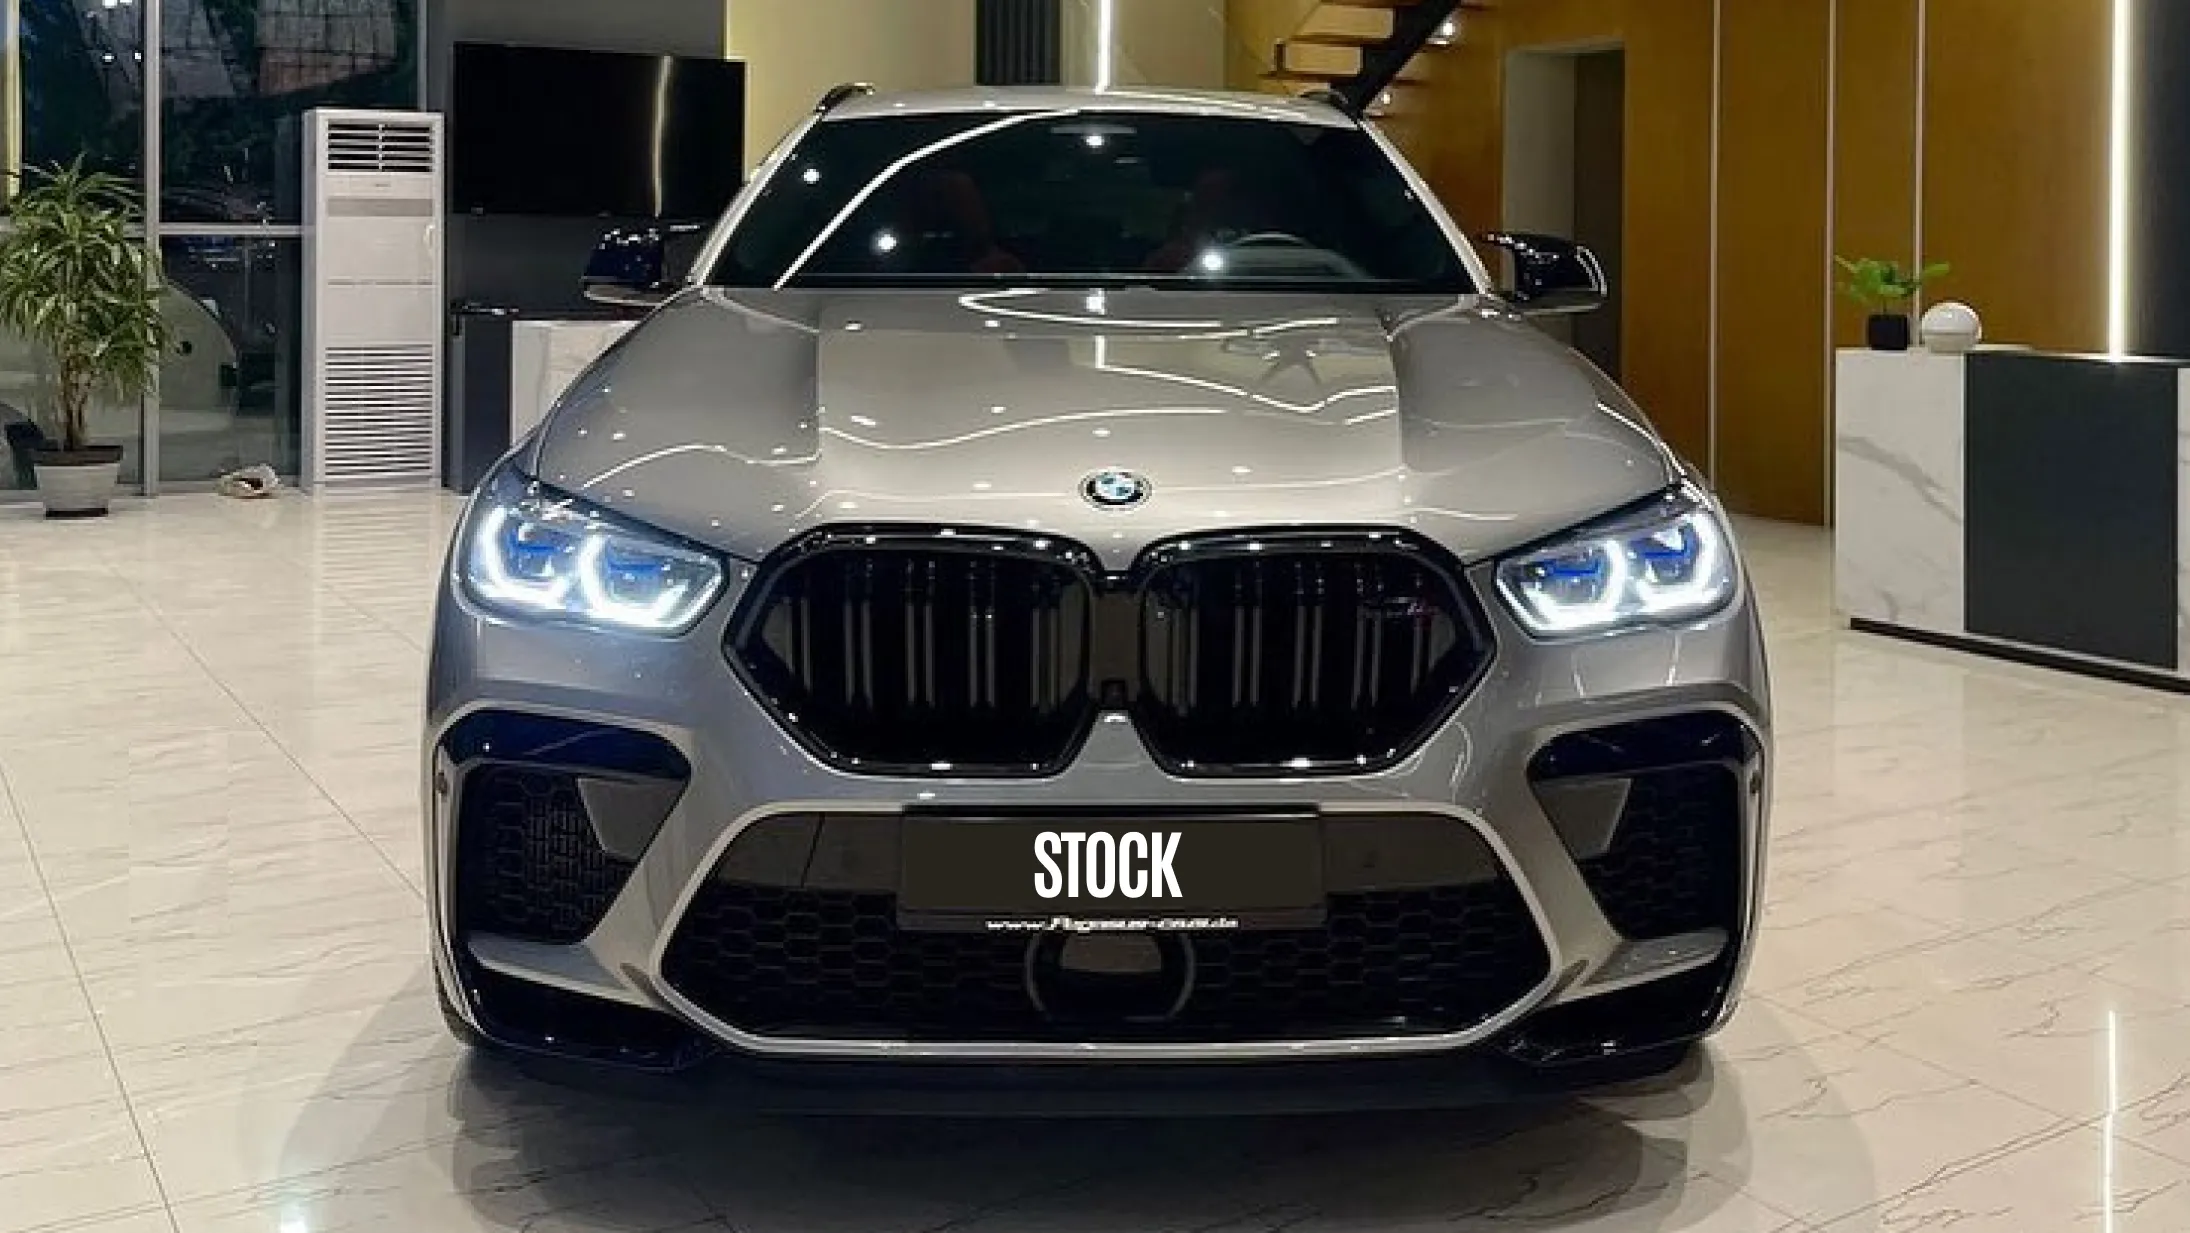 Front view on a BMW X6M with a body kit giving the car a custom appearance